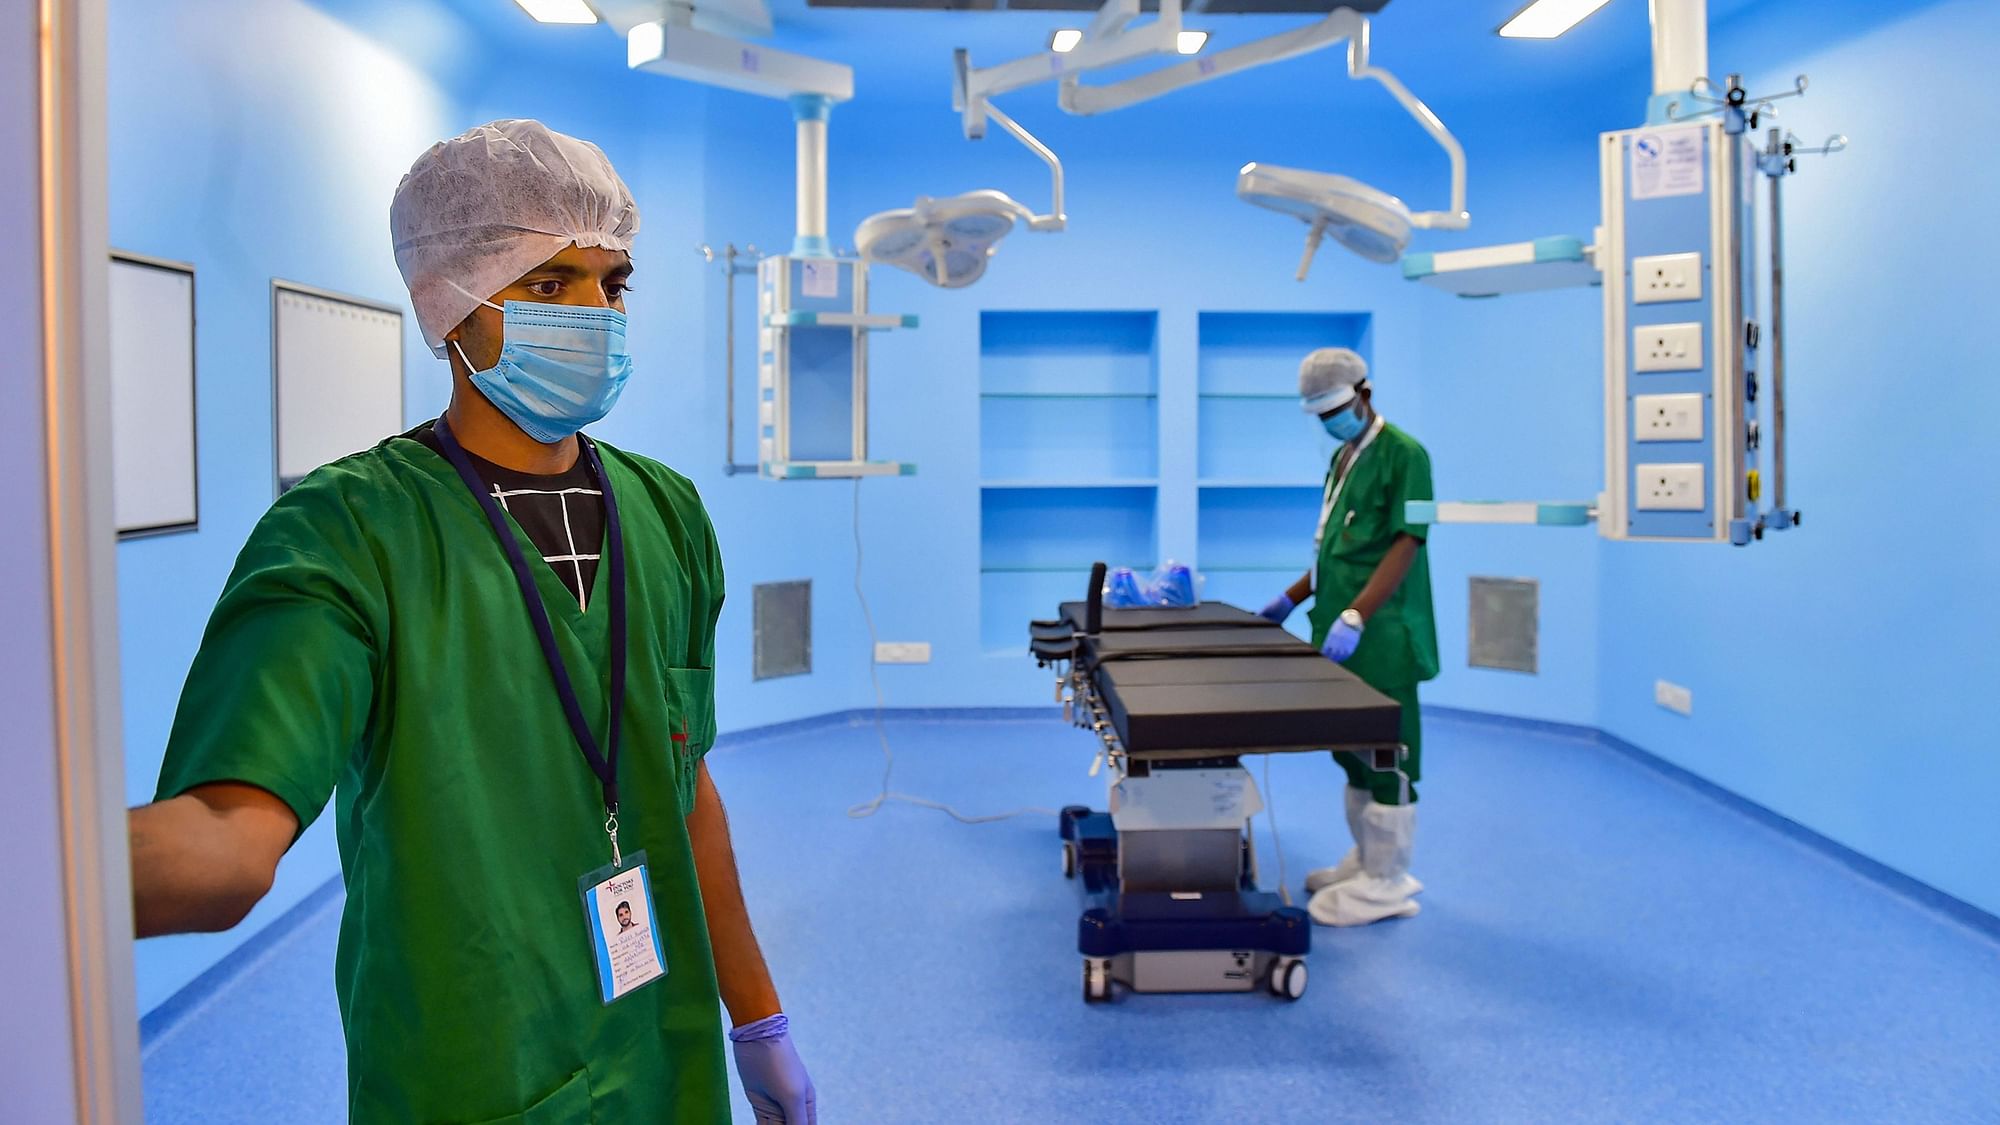 Workers prepare an OT (Operation Theatre) at an ICU ward, specially for COVID-19 patients, during its inauguration in Bengaluru, on Wednesday, 26 August, 2020. Image used for representation.